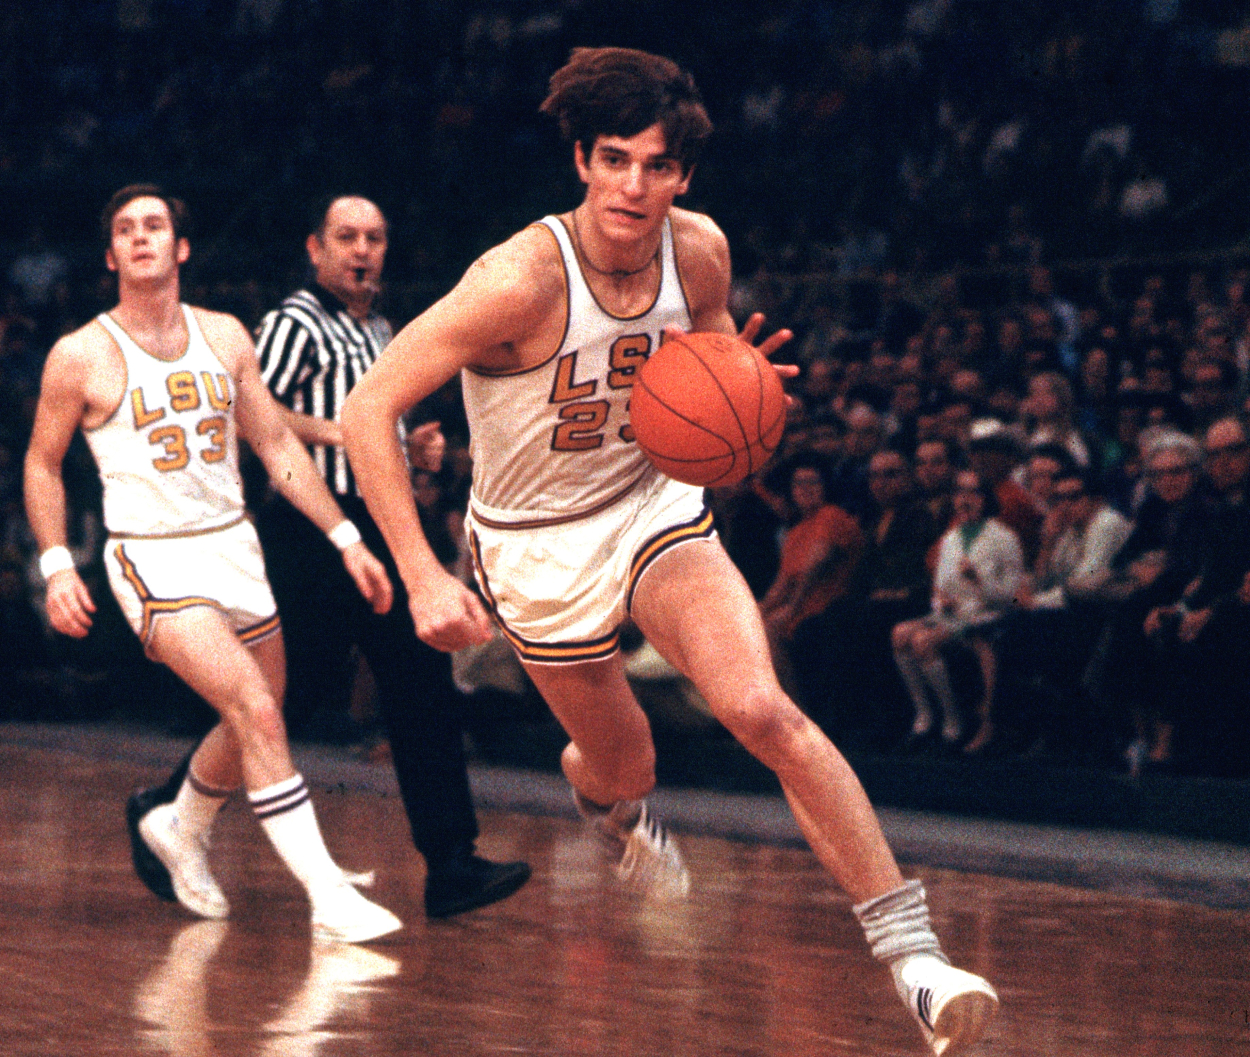 Pete Maravich of the LSU Tigers drives to the basket.